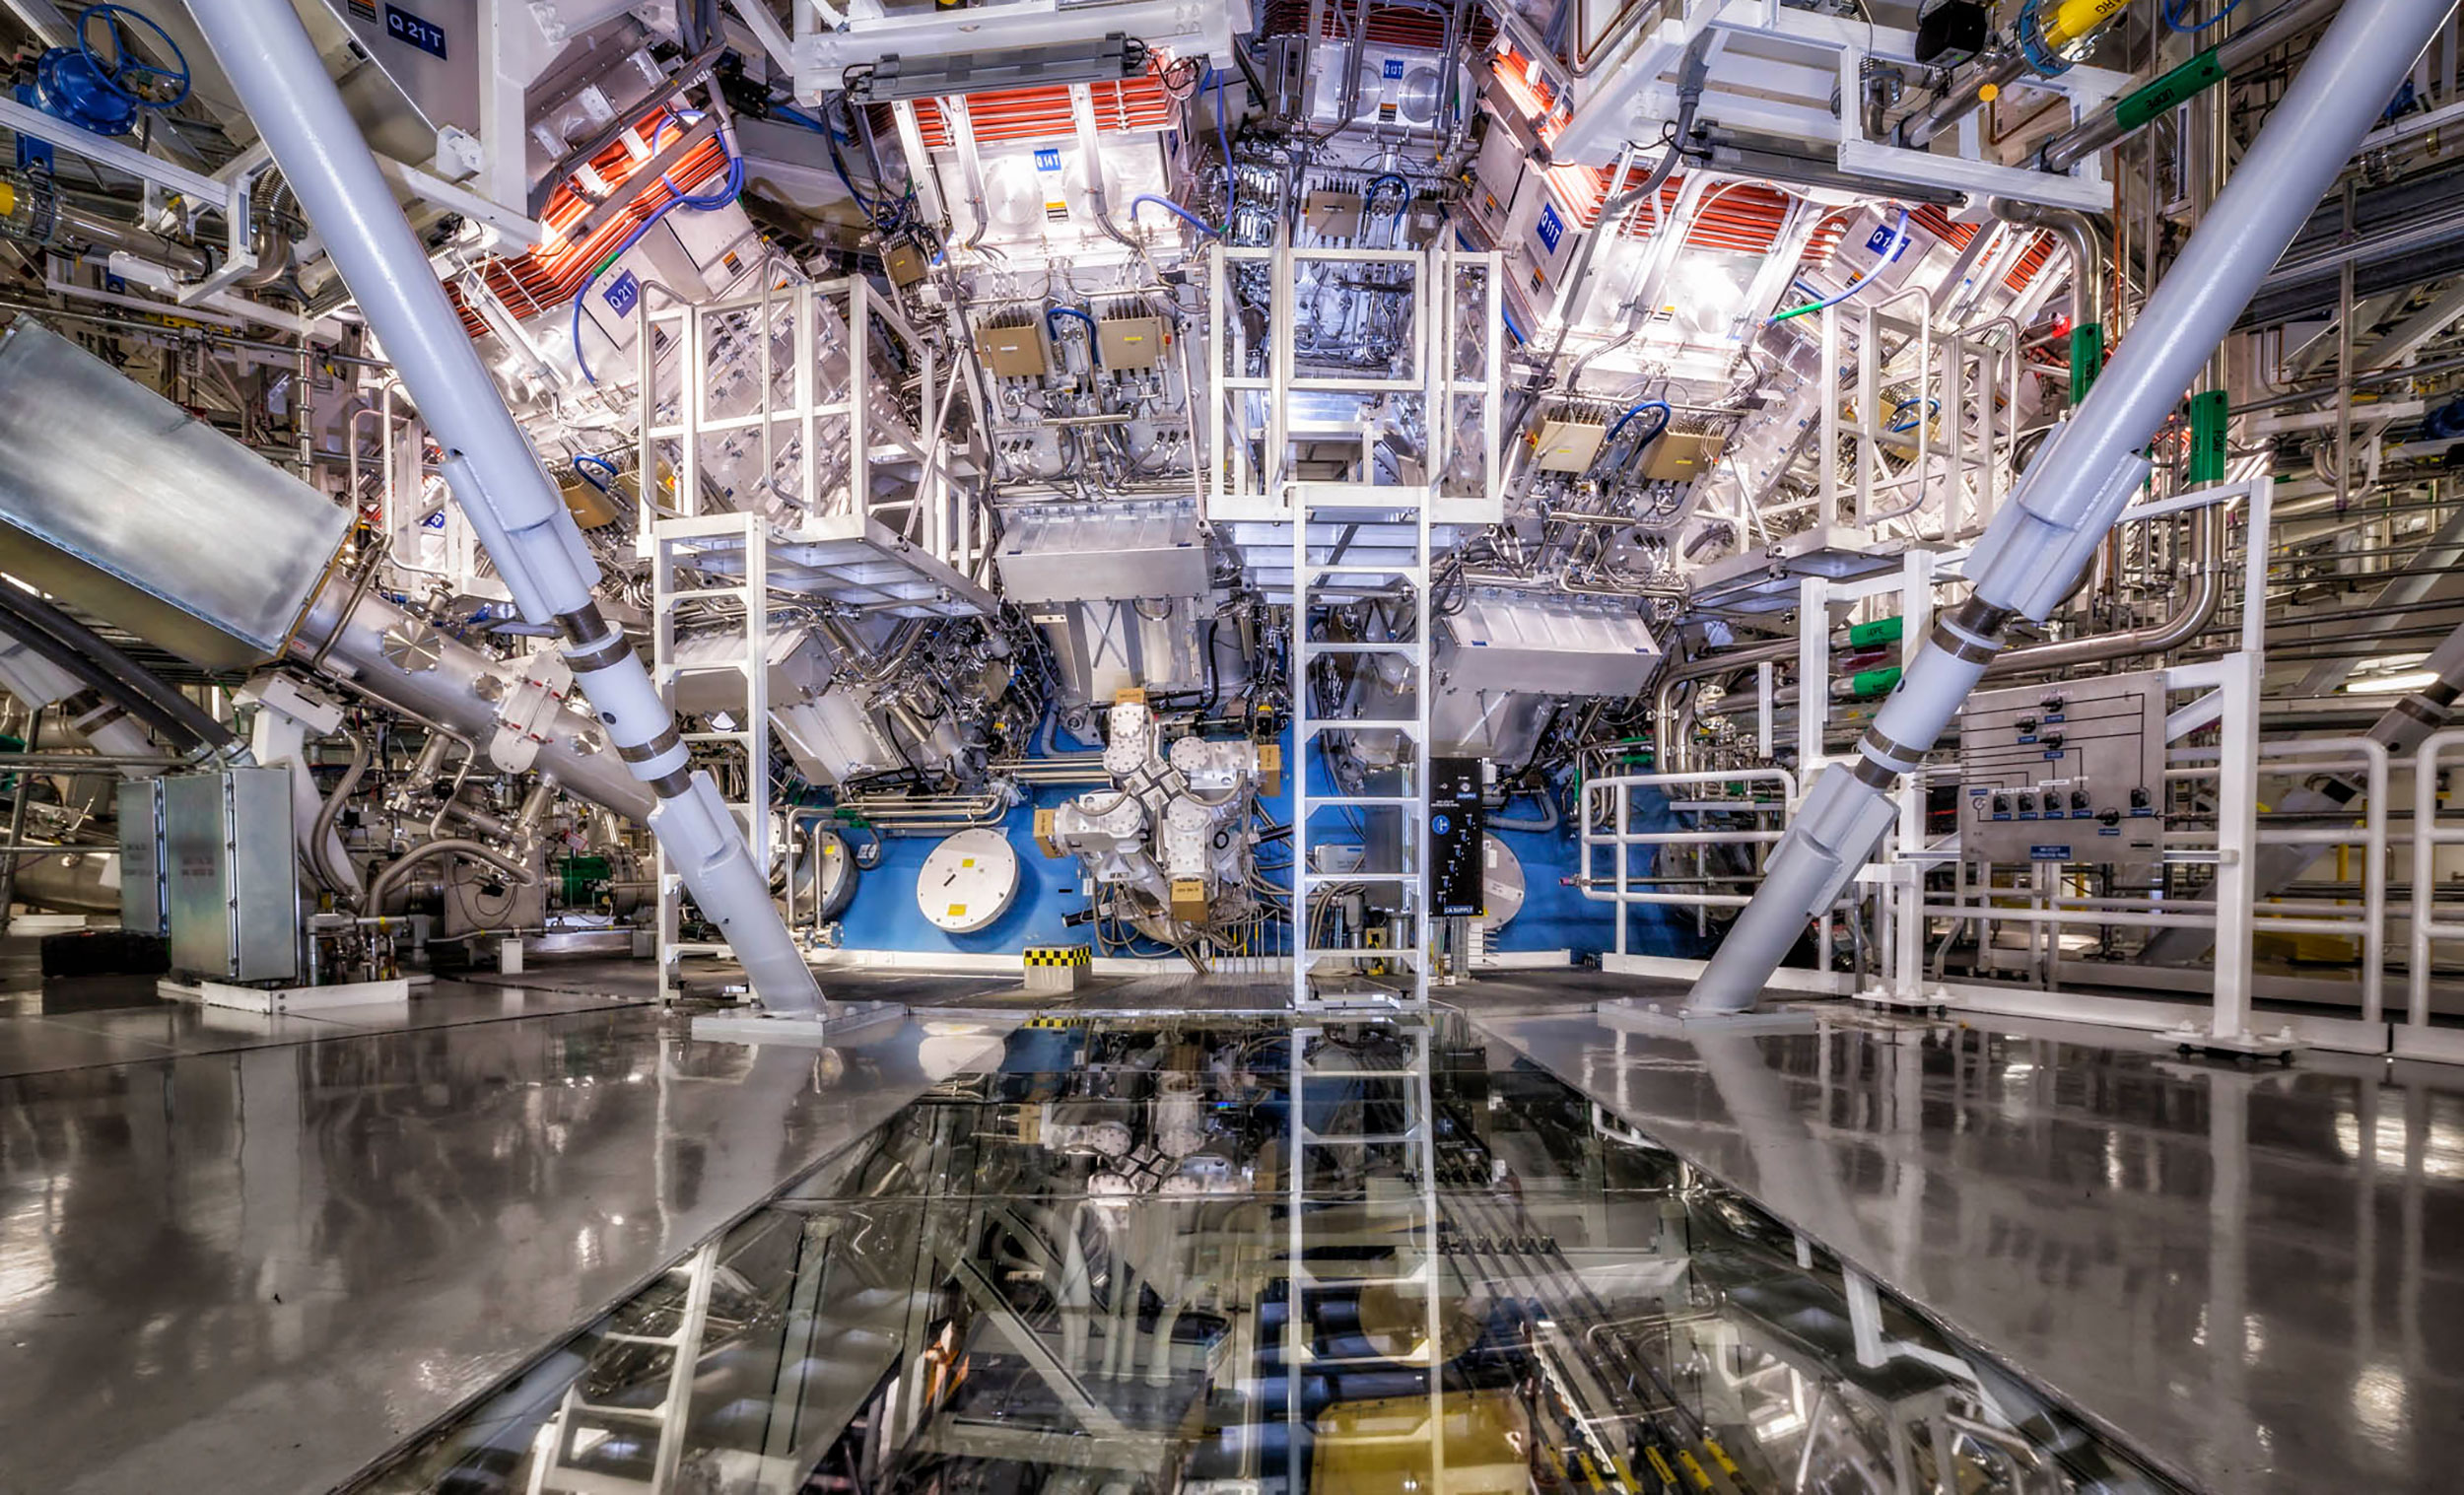 The target chamber at the National Ignition Facility at Lawrence Livermore National Laboratory in California is where the magic happens: temperatures of 100 million degrees and pressures intense enough to compress the target to a density 100 times that of lead.  (Damien Jemison/LLNL)